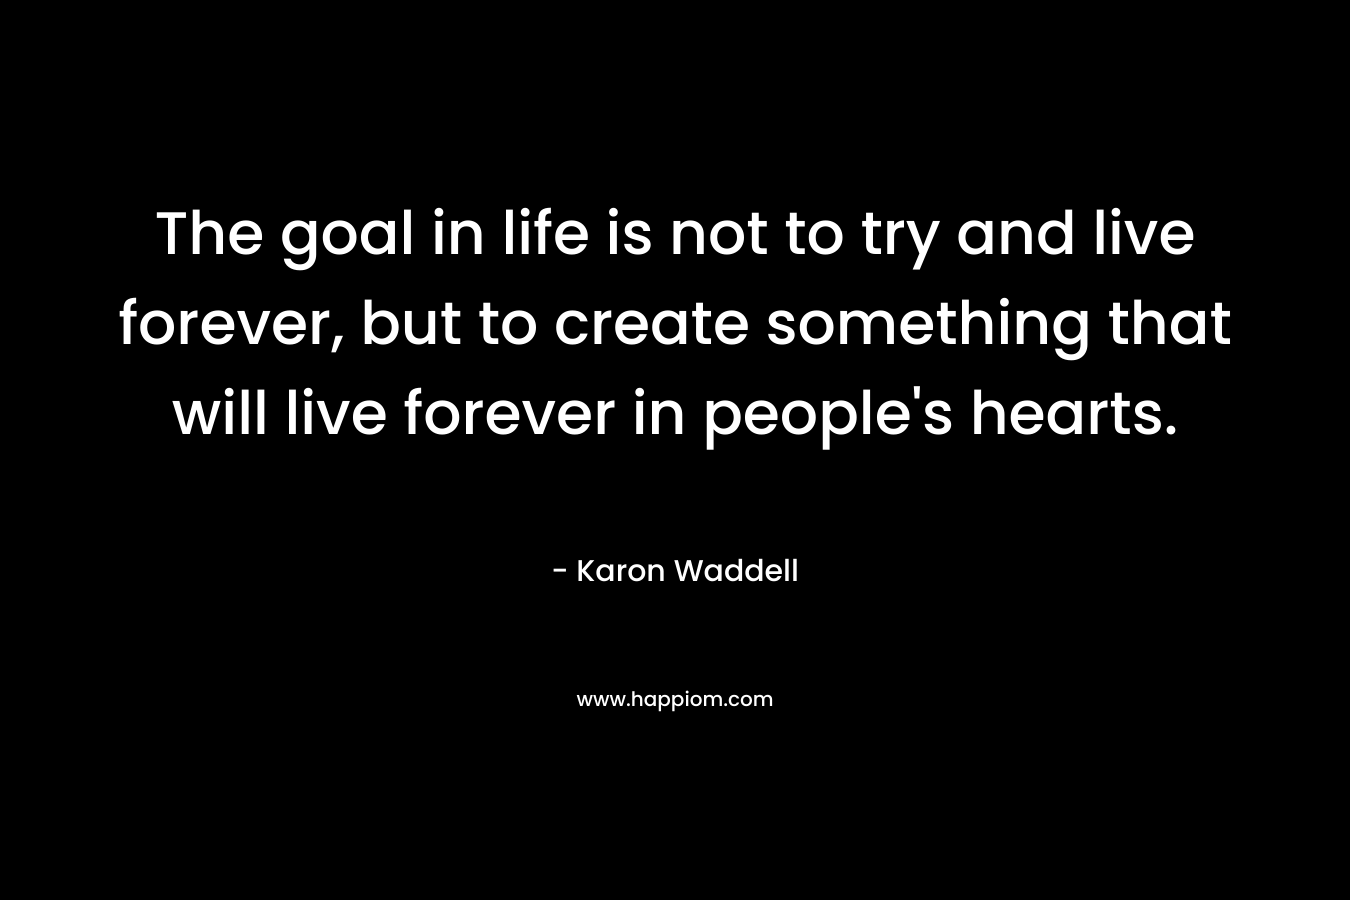 The goal in life is not to try and live forever, but to create something that will live forever in people's hearts.